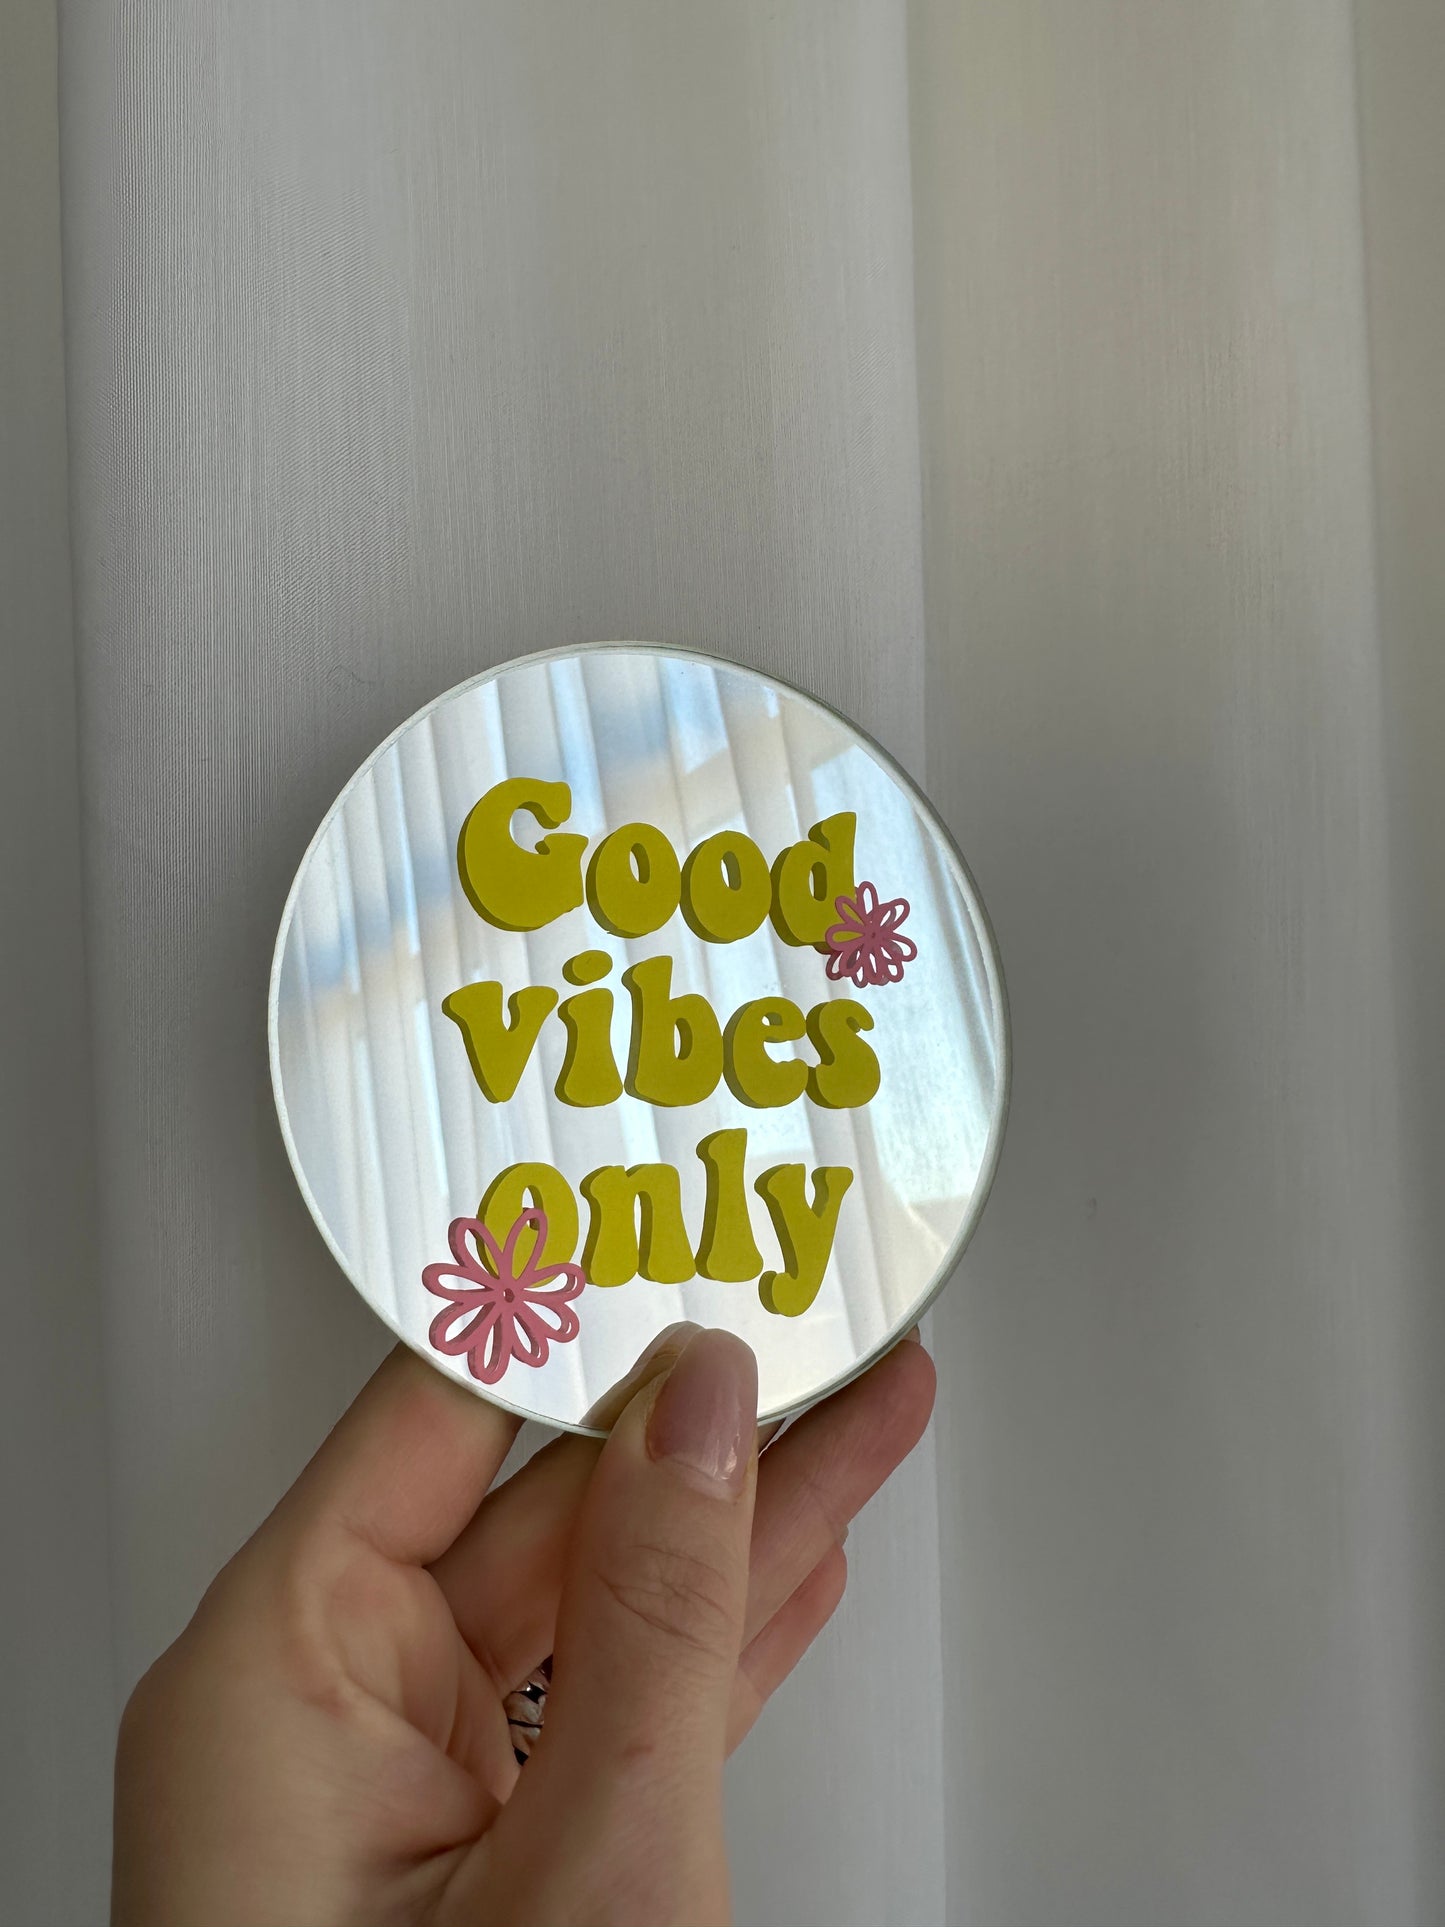 Goodvibes only yellow mirror